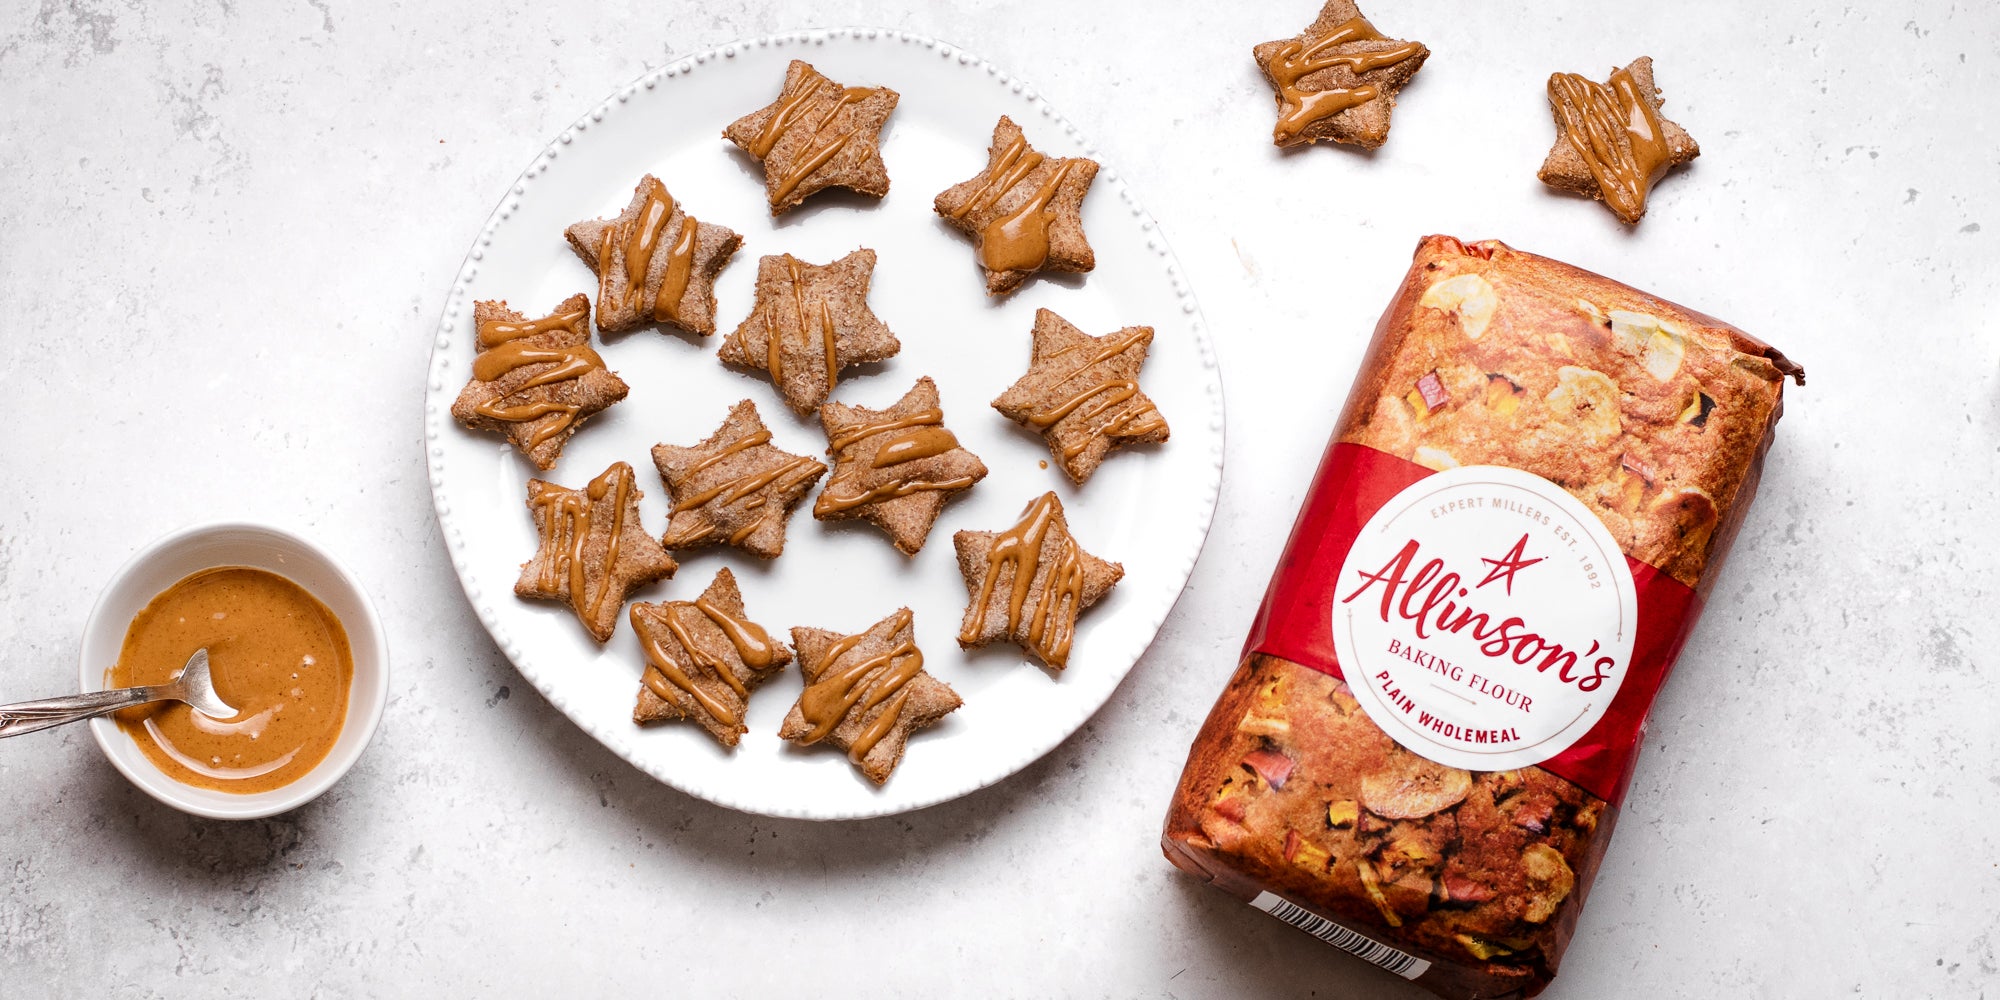 Dog Biscuits cut into festive stars and drizzled with peanut butter, next to a bag of Allinsons plain flour